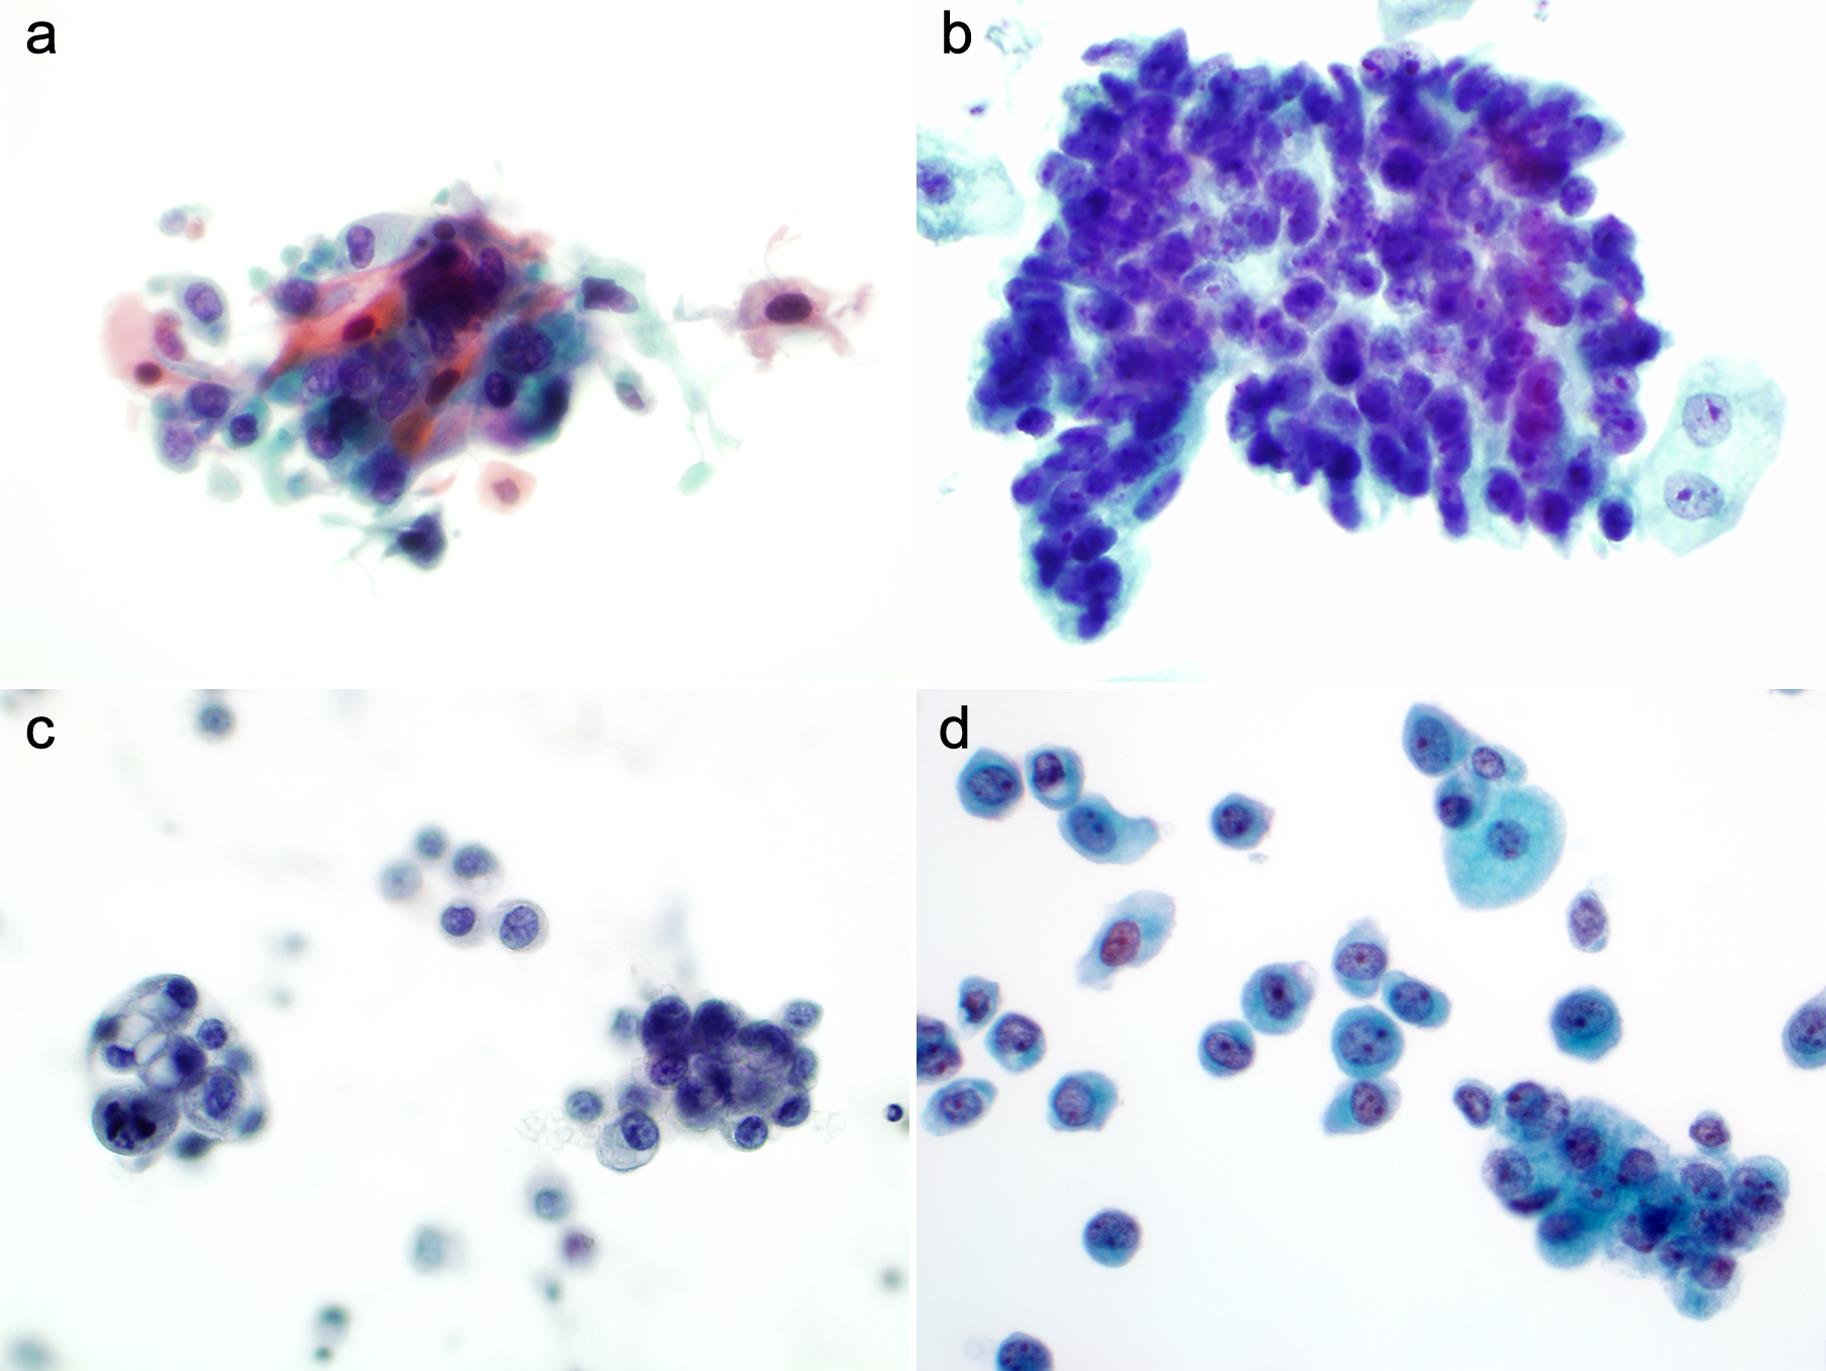 Variants of HGUC. HGUC may present with squamous differentiation (a), glandular differentiation (b), micropapillary HGUC features (c), and plasmacytoid HGUC features (d).